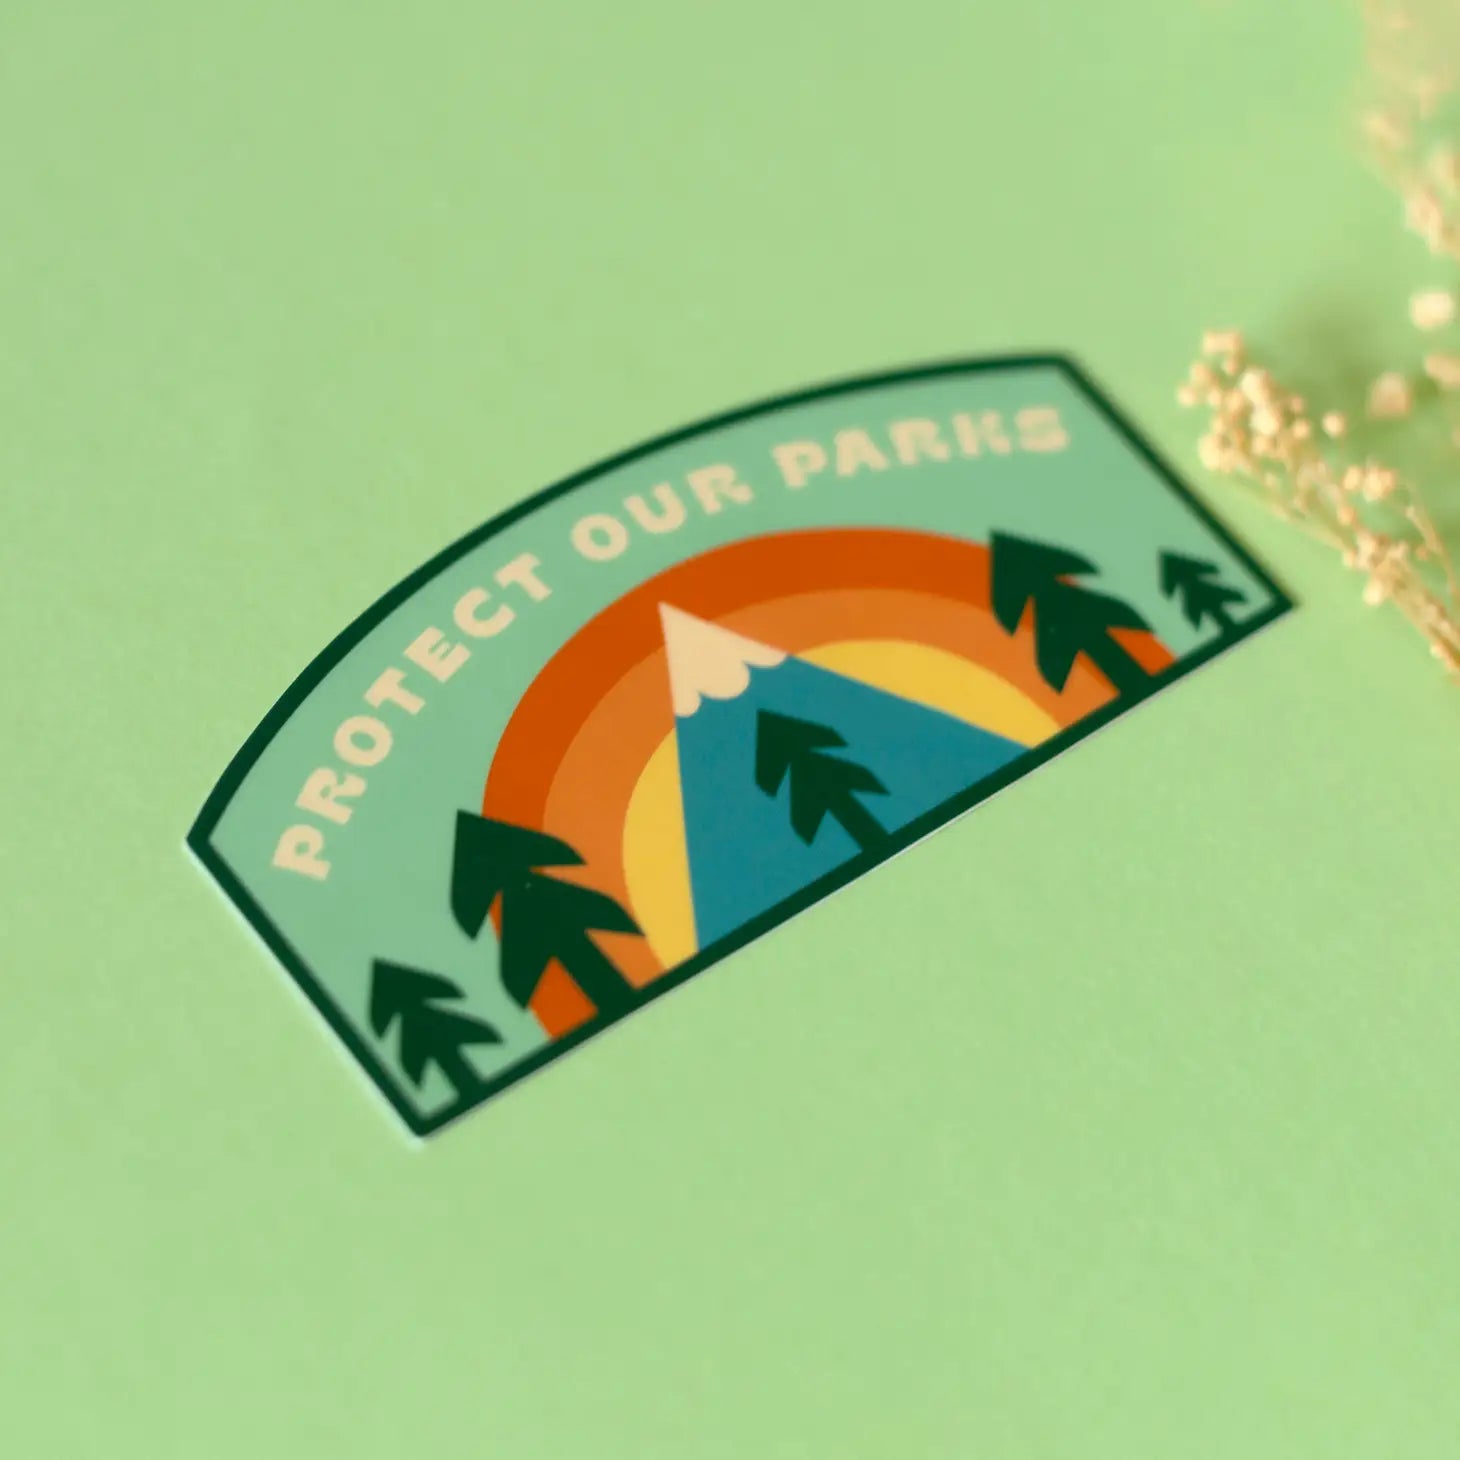 Protect Our Parks Rainbow - Sticker